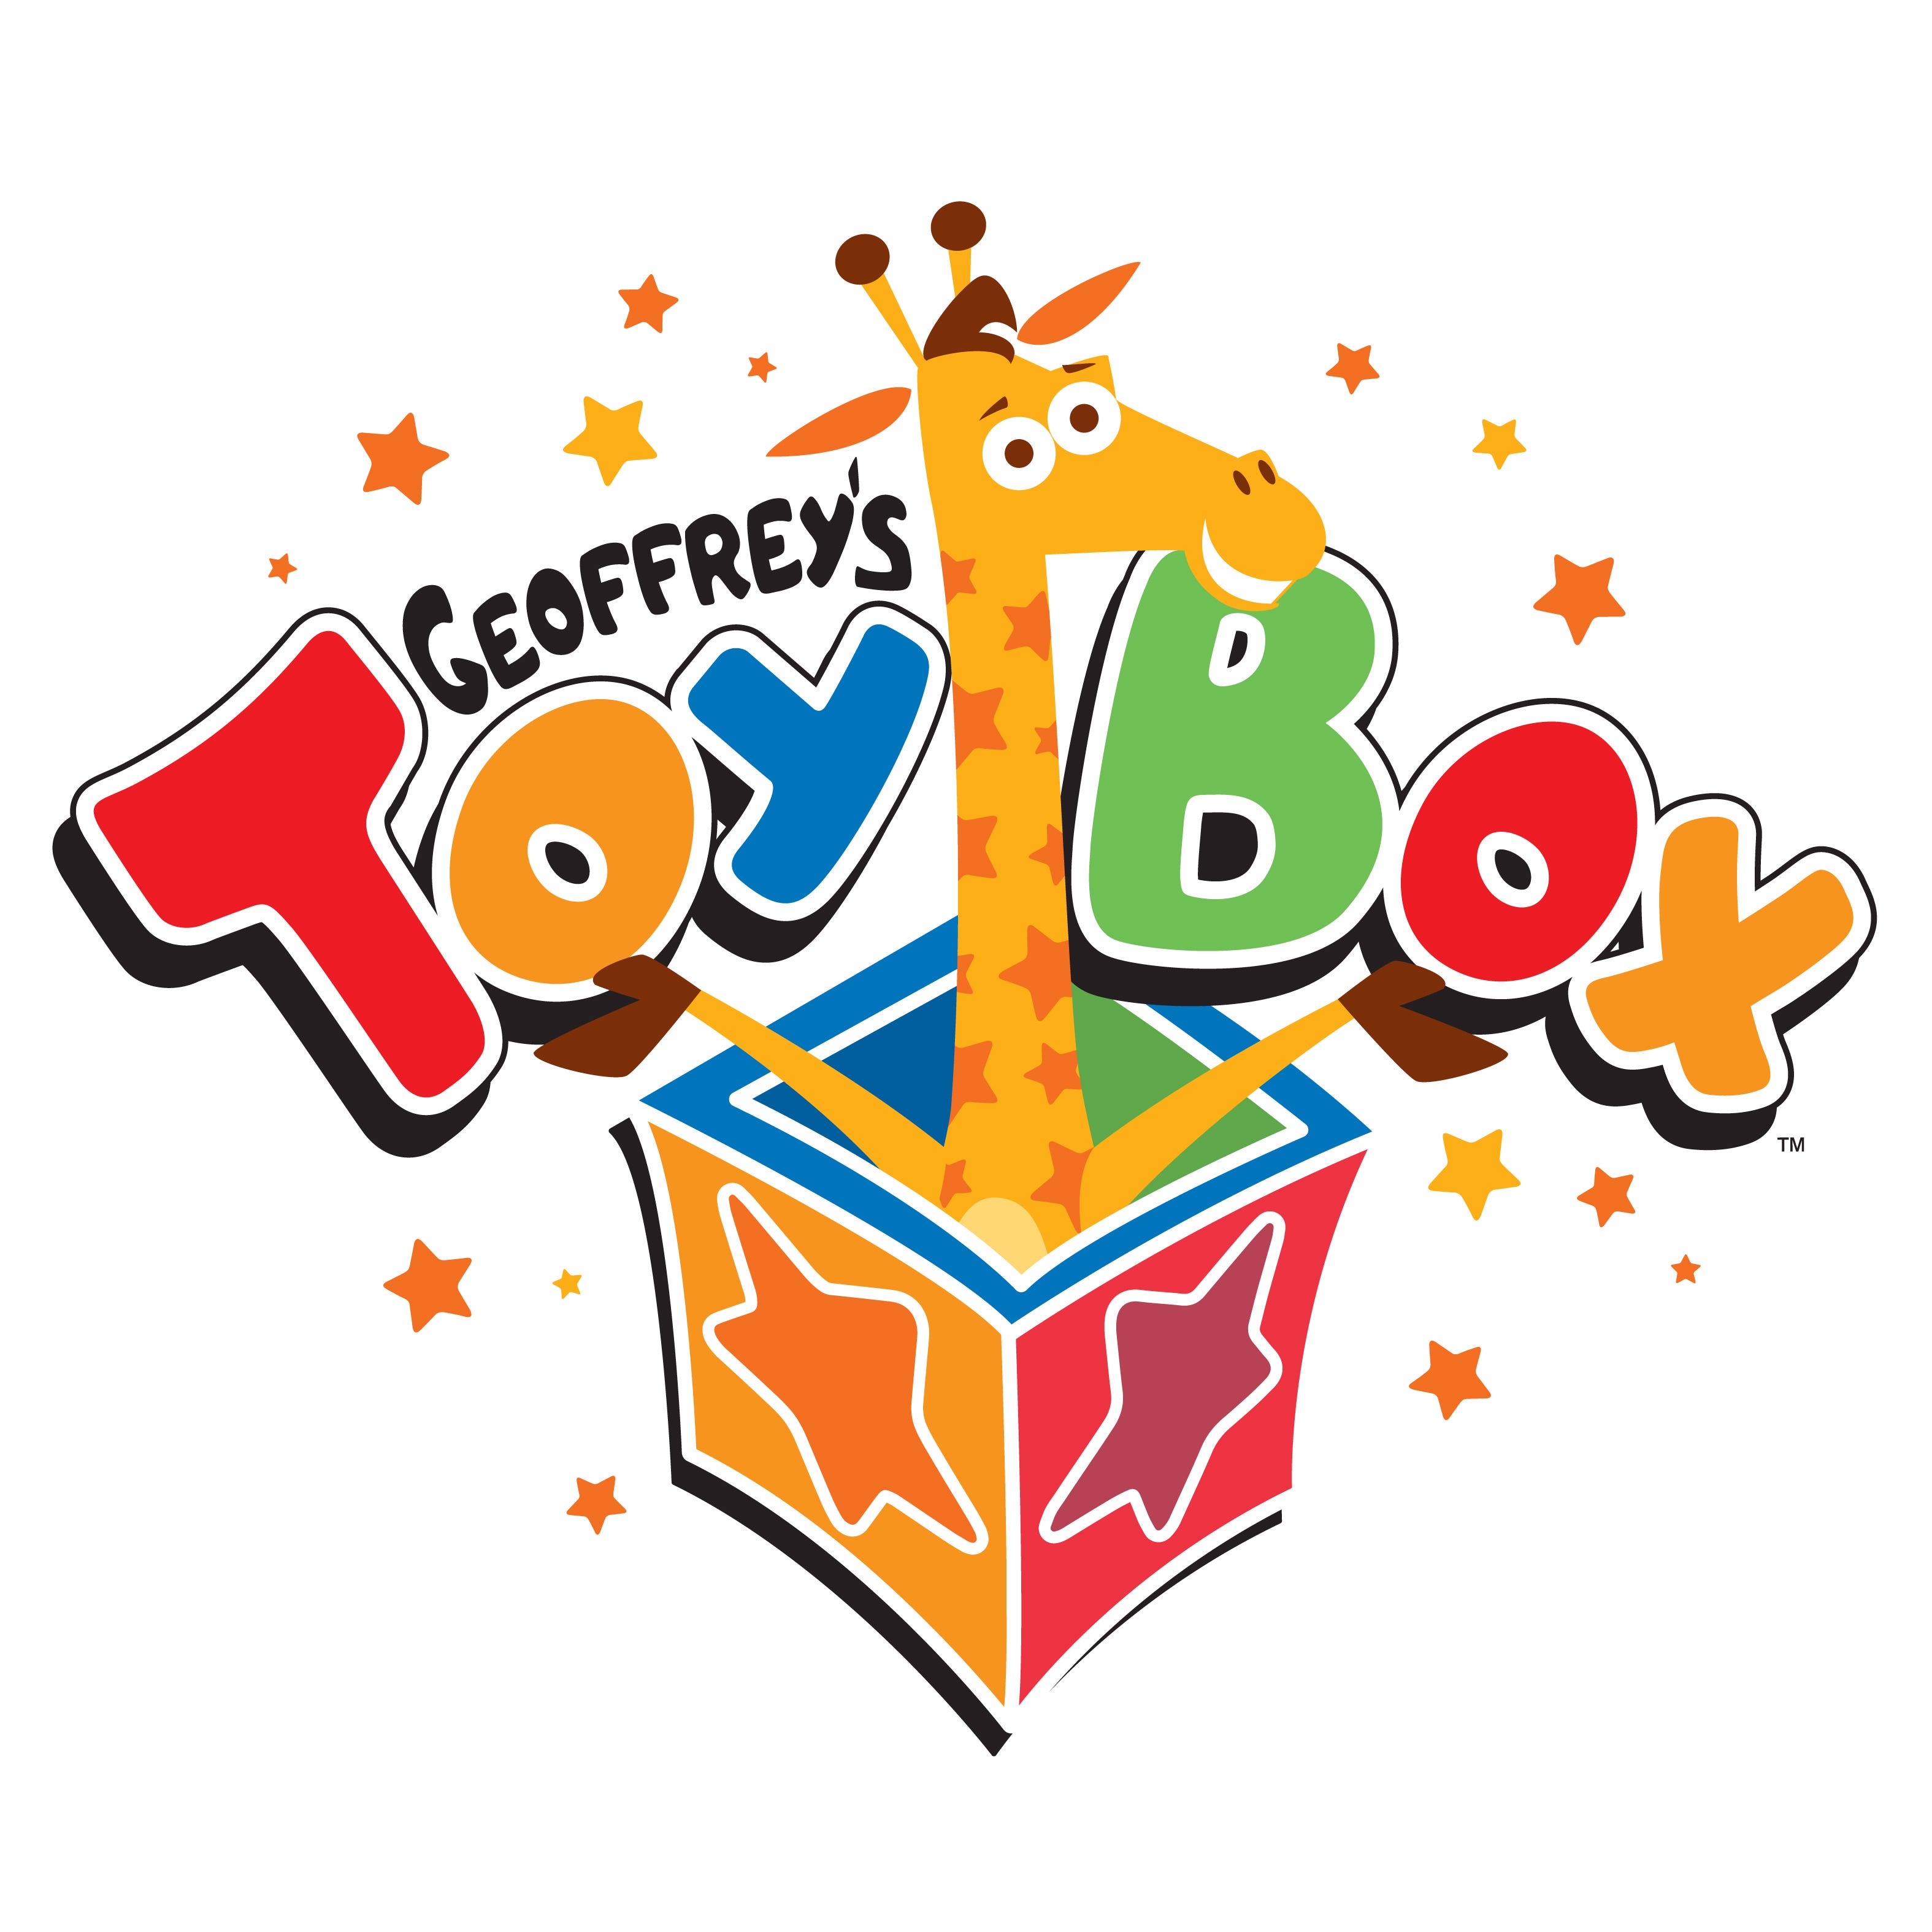 toy chest toys r us